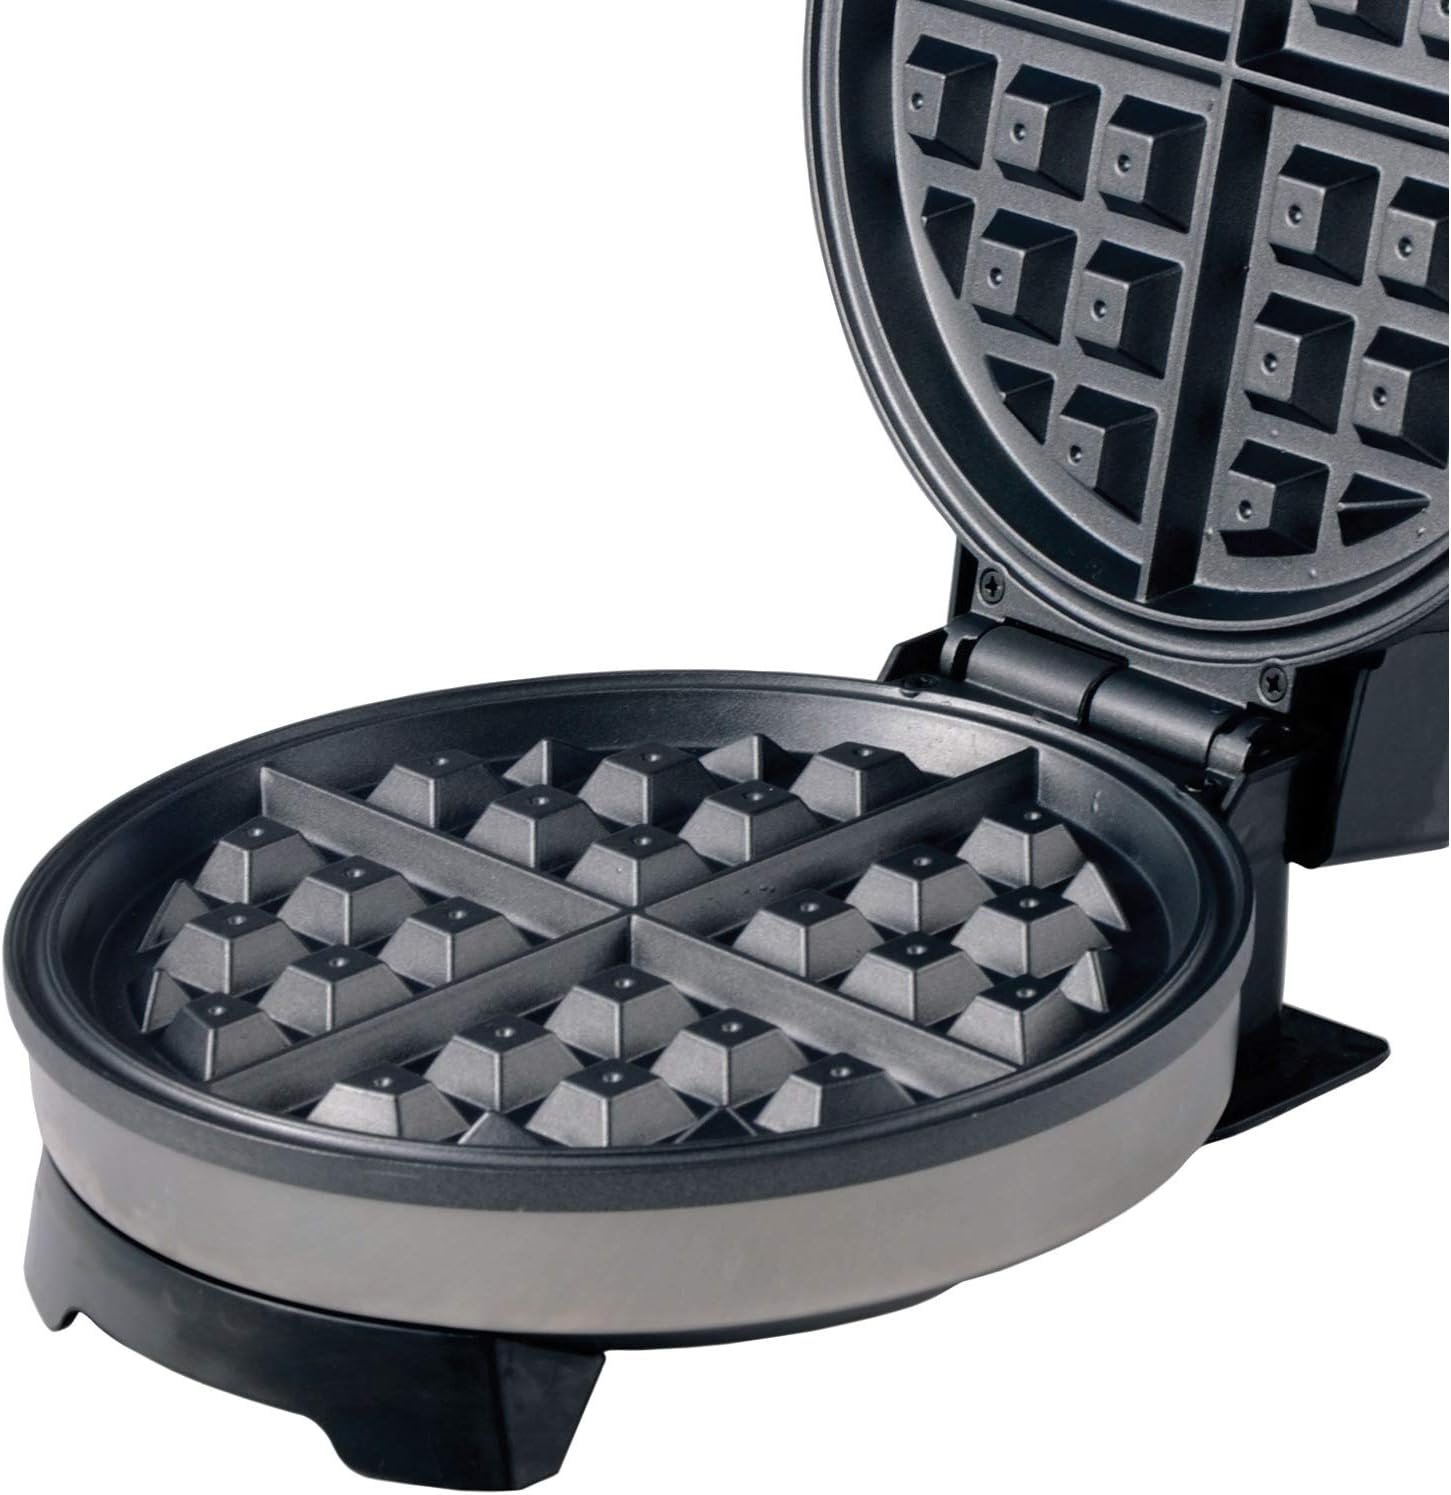 Brentwood Belgian Waffle Maker Non-Stick, 7, Stainless Steel